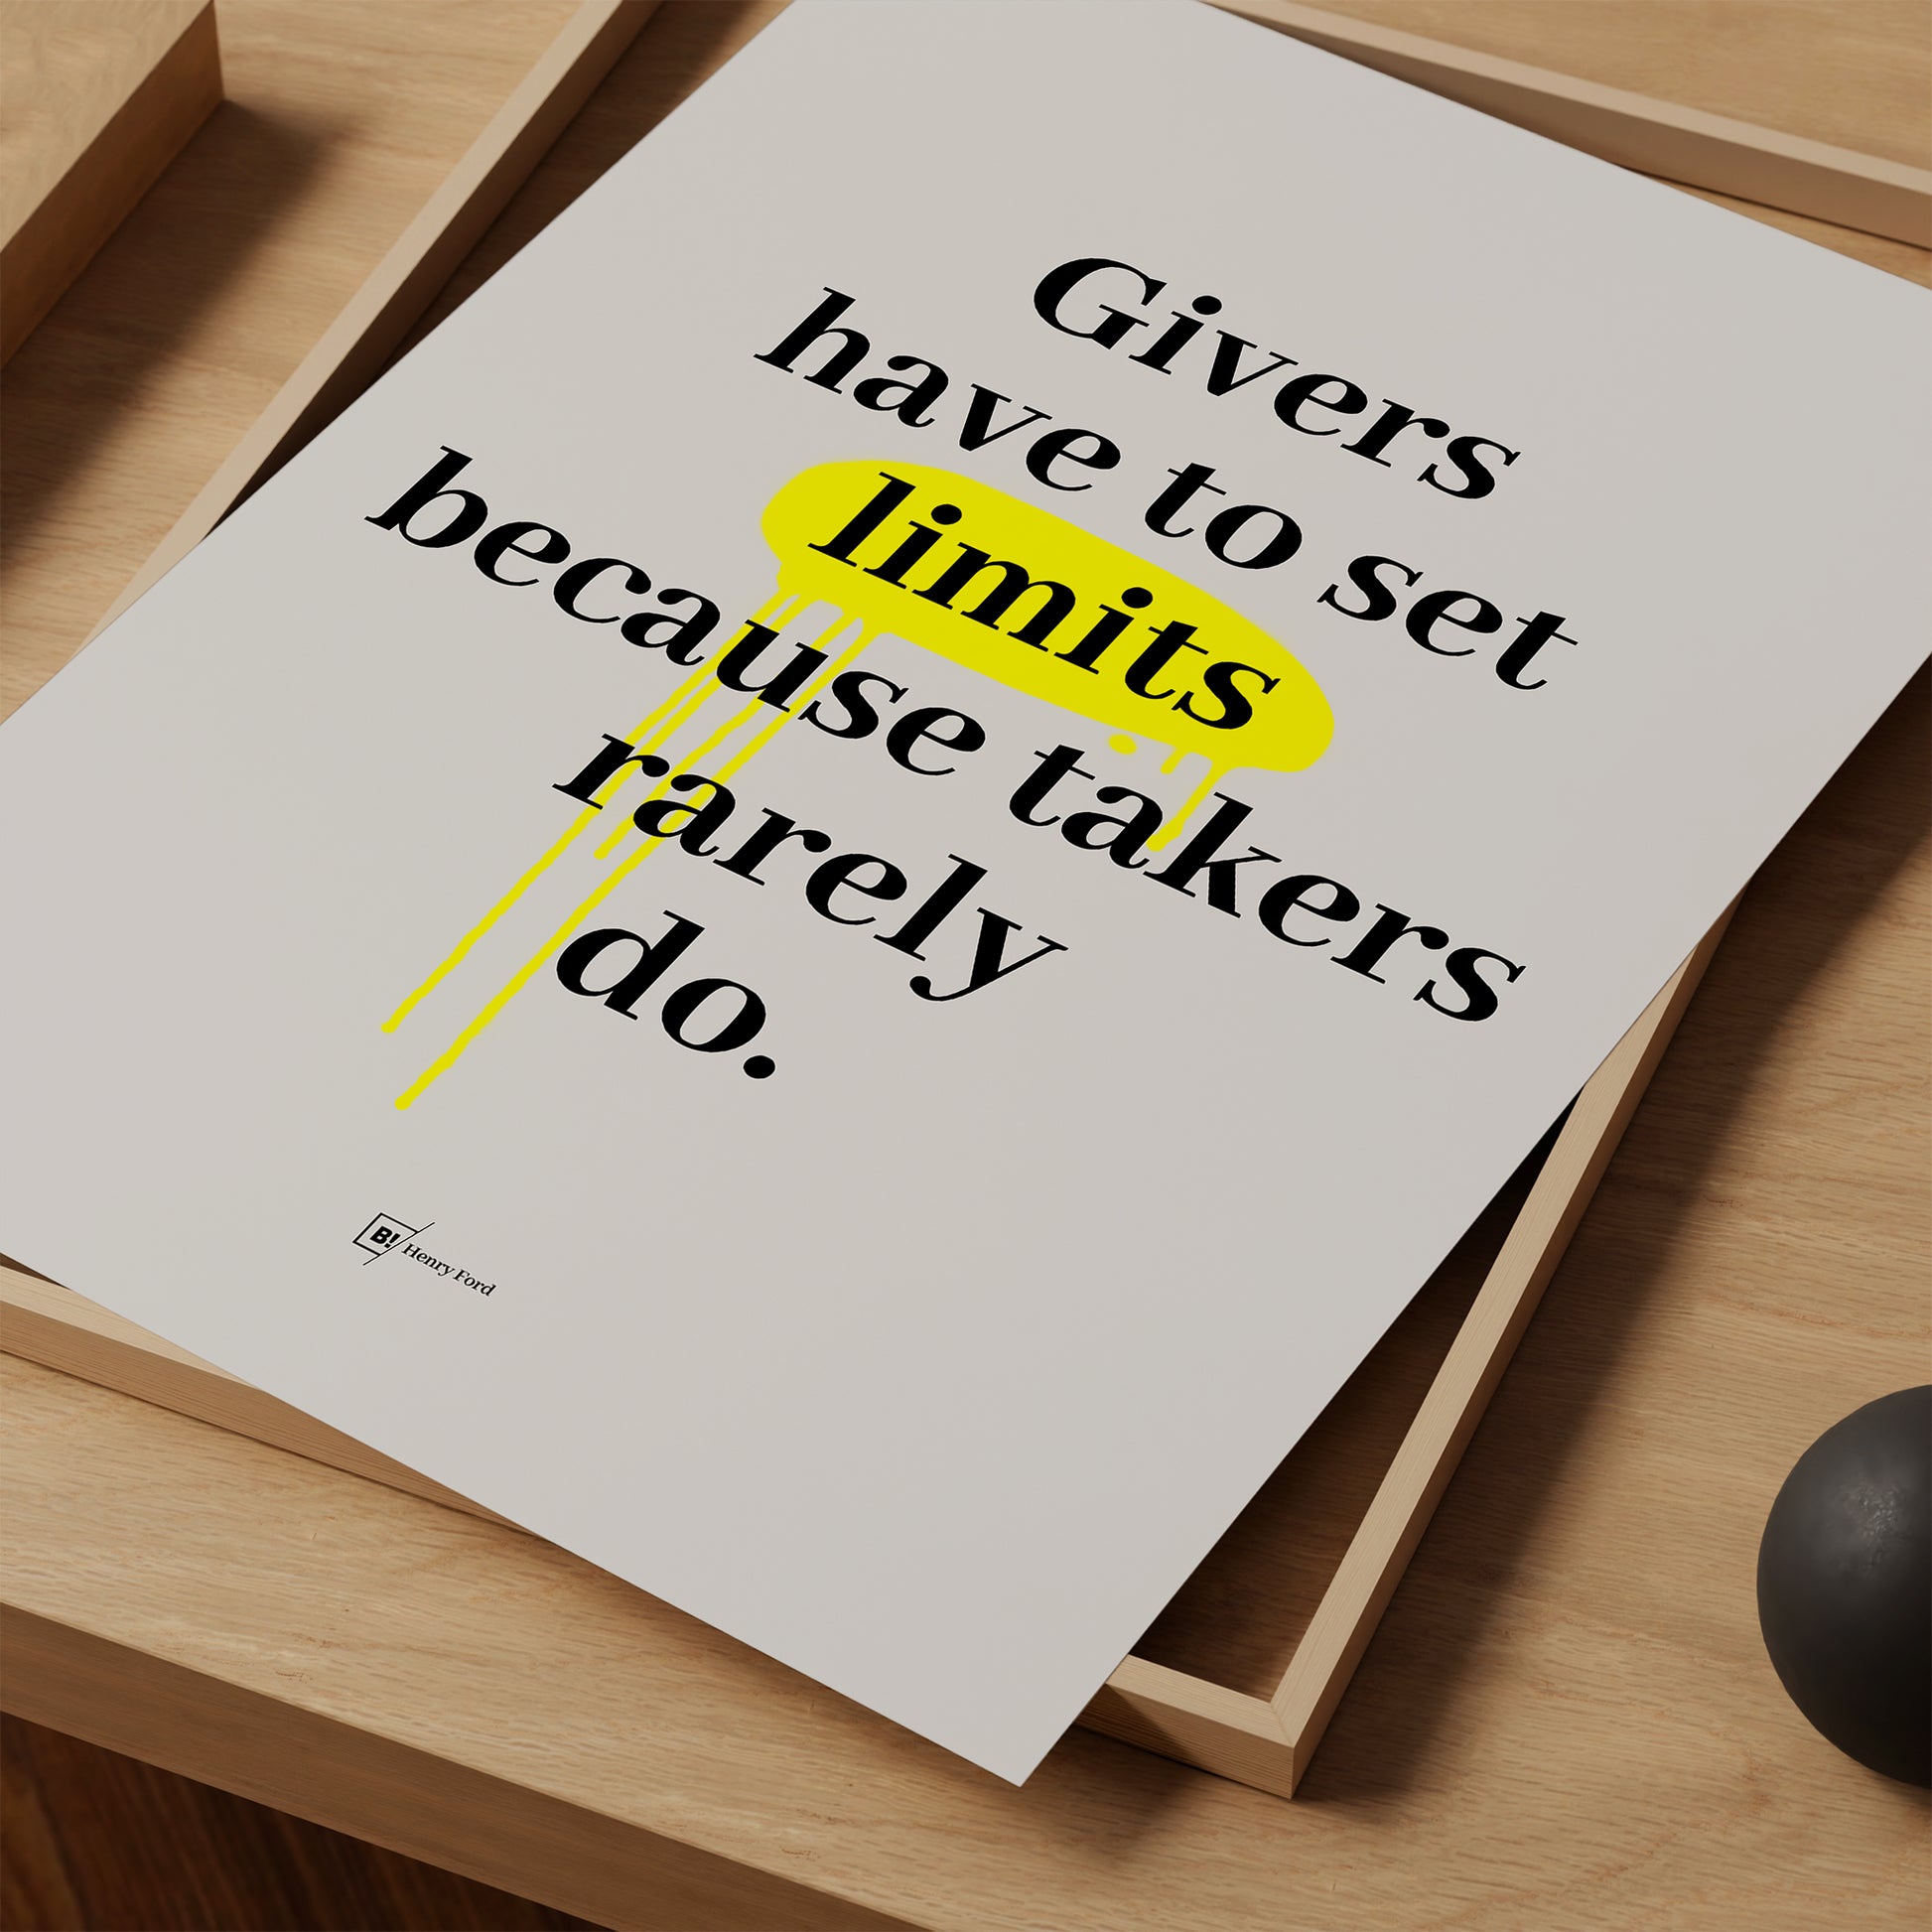 Be inspired by Henry Ford's famous "Givers have to set limits because takers rarely do" quote art print. This artwork was printed using giclée on archival acid-free paper and is presented as a print close-up that captures its timeless beauty in every detail.